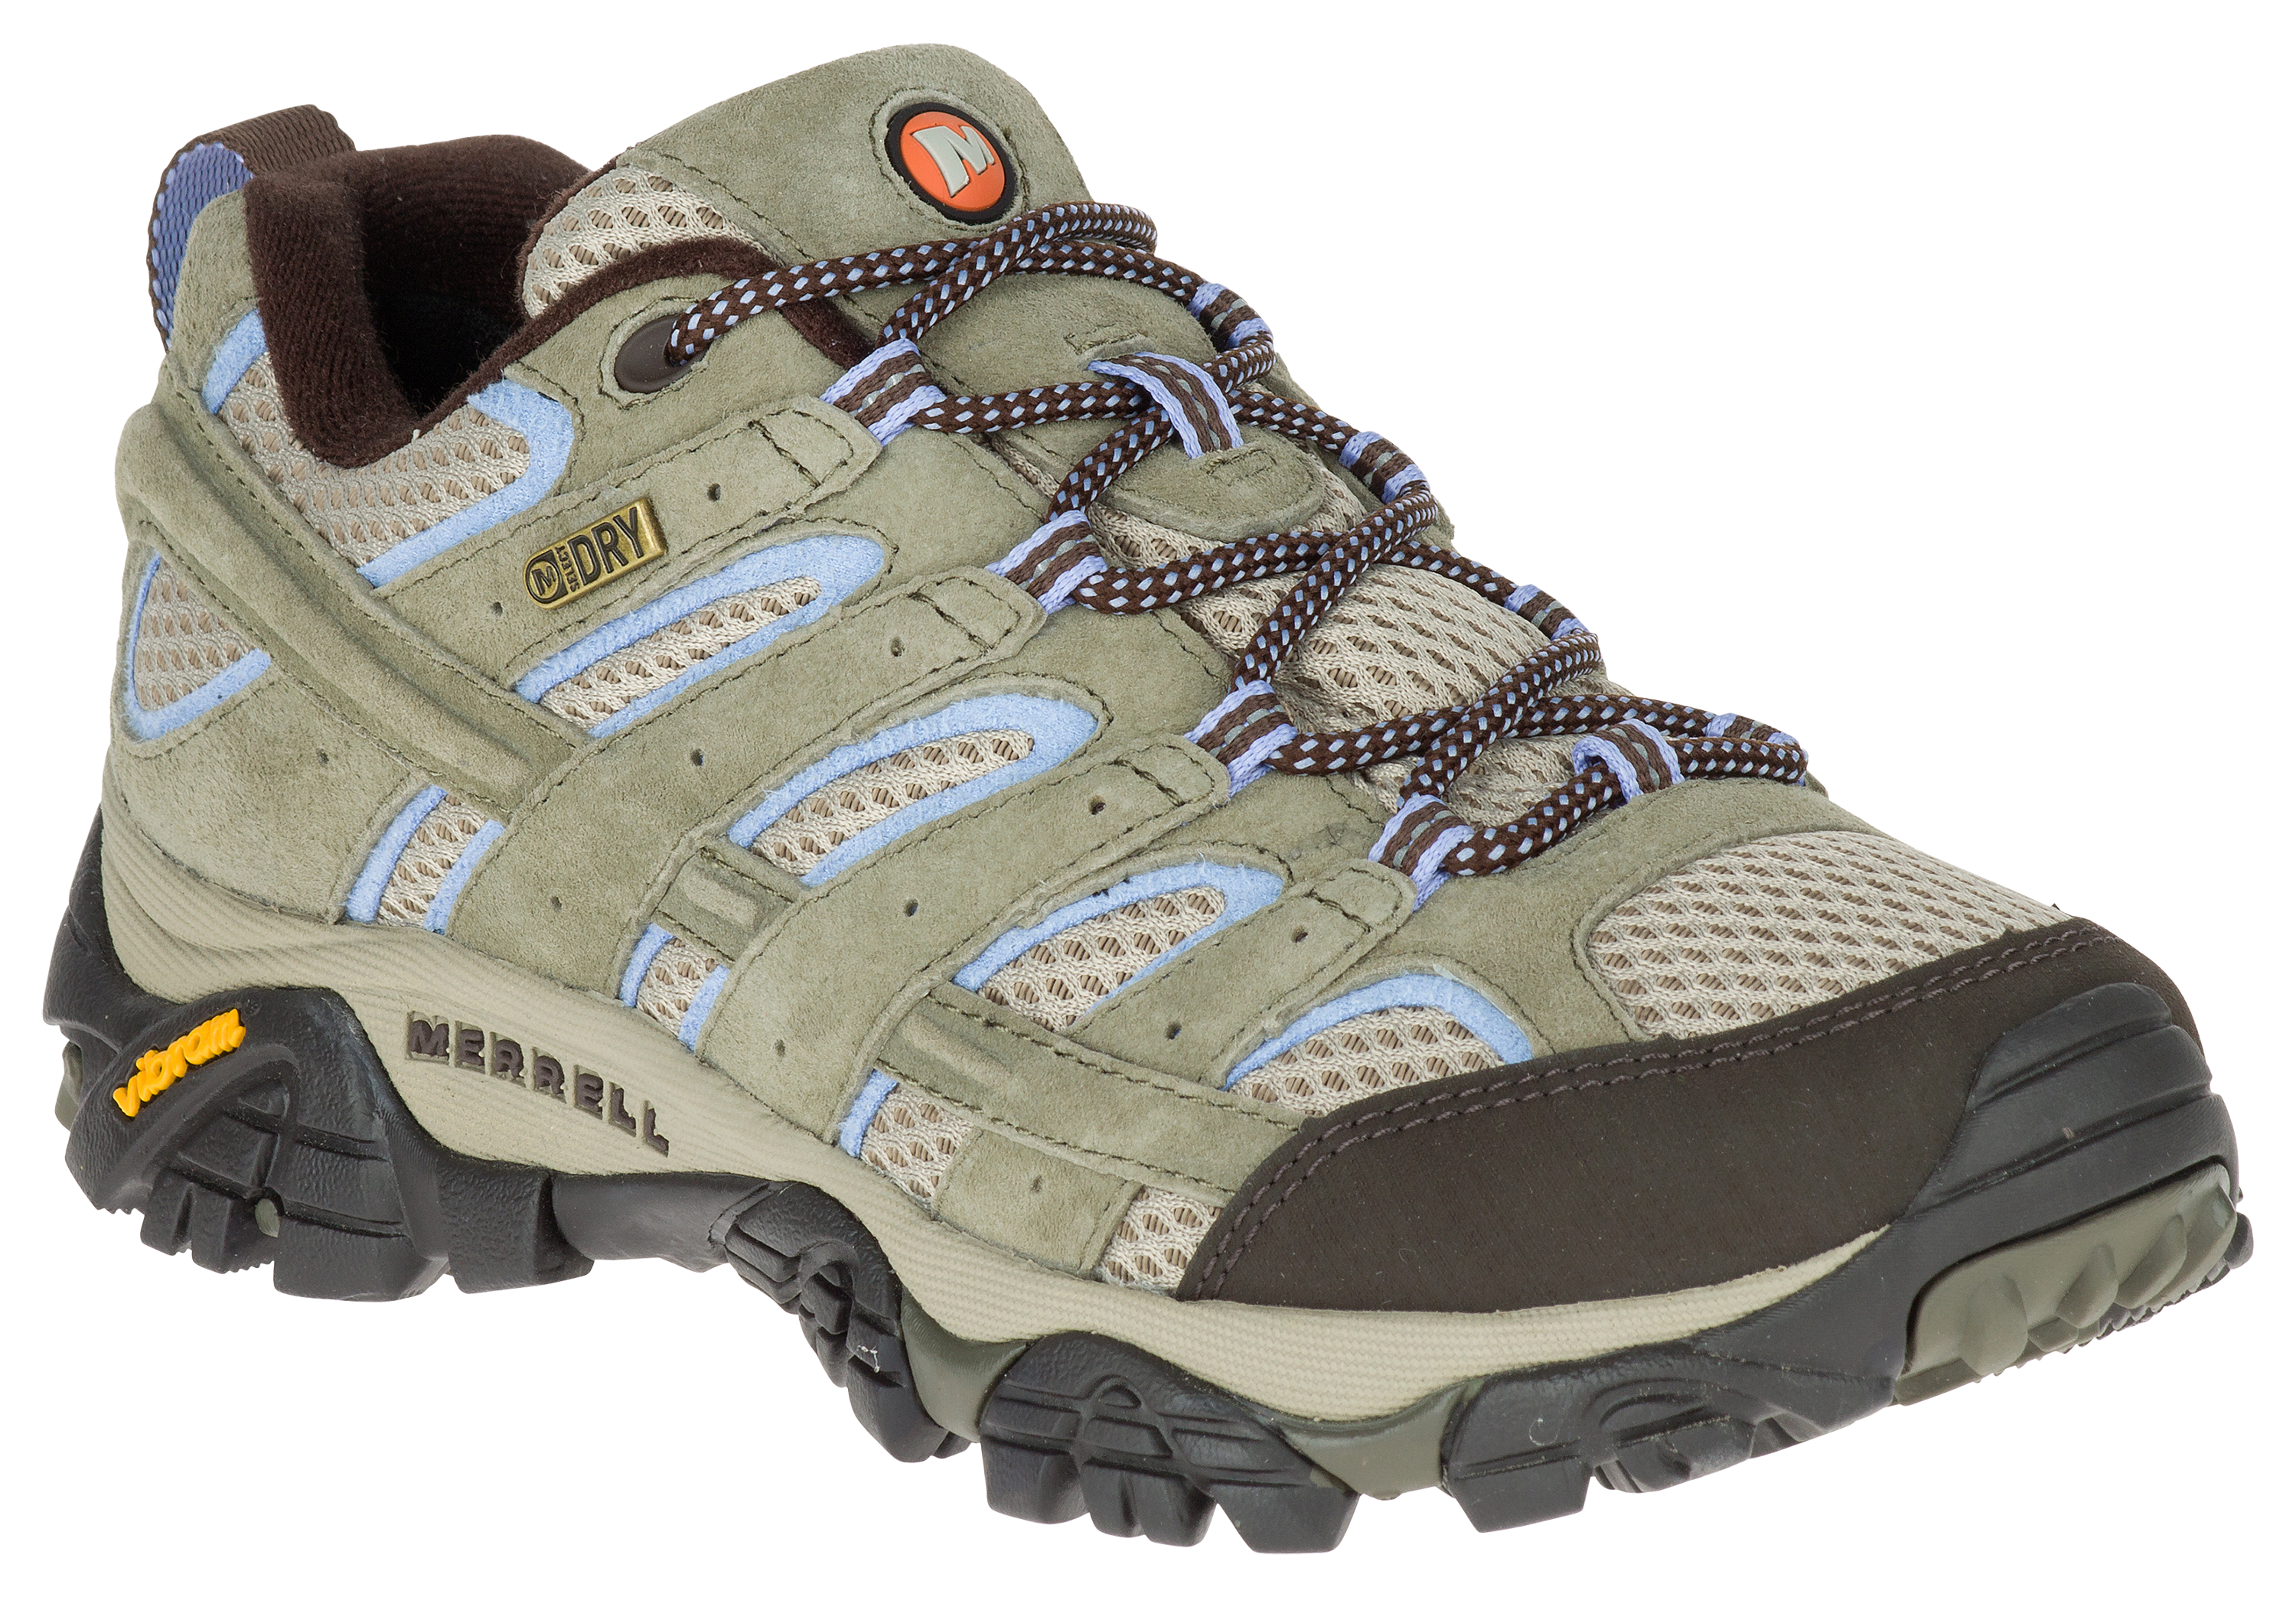 stroom Onschuld kans Merrell Moab 2 Waterproof Hiking Shoes for Ladies | Cabela's